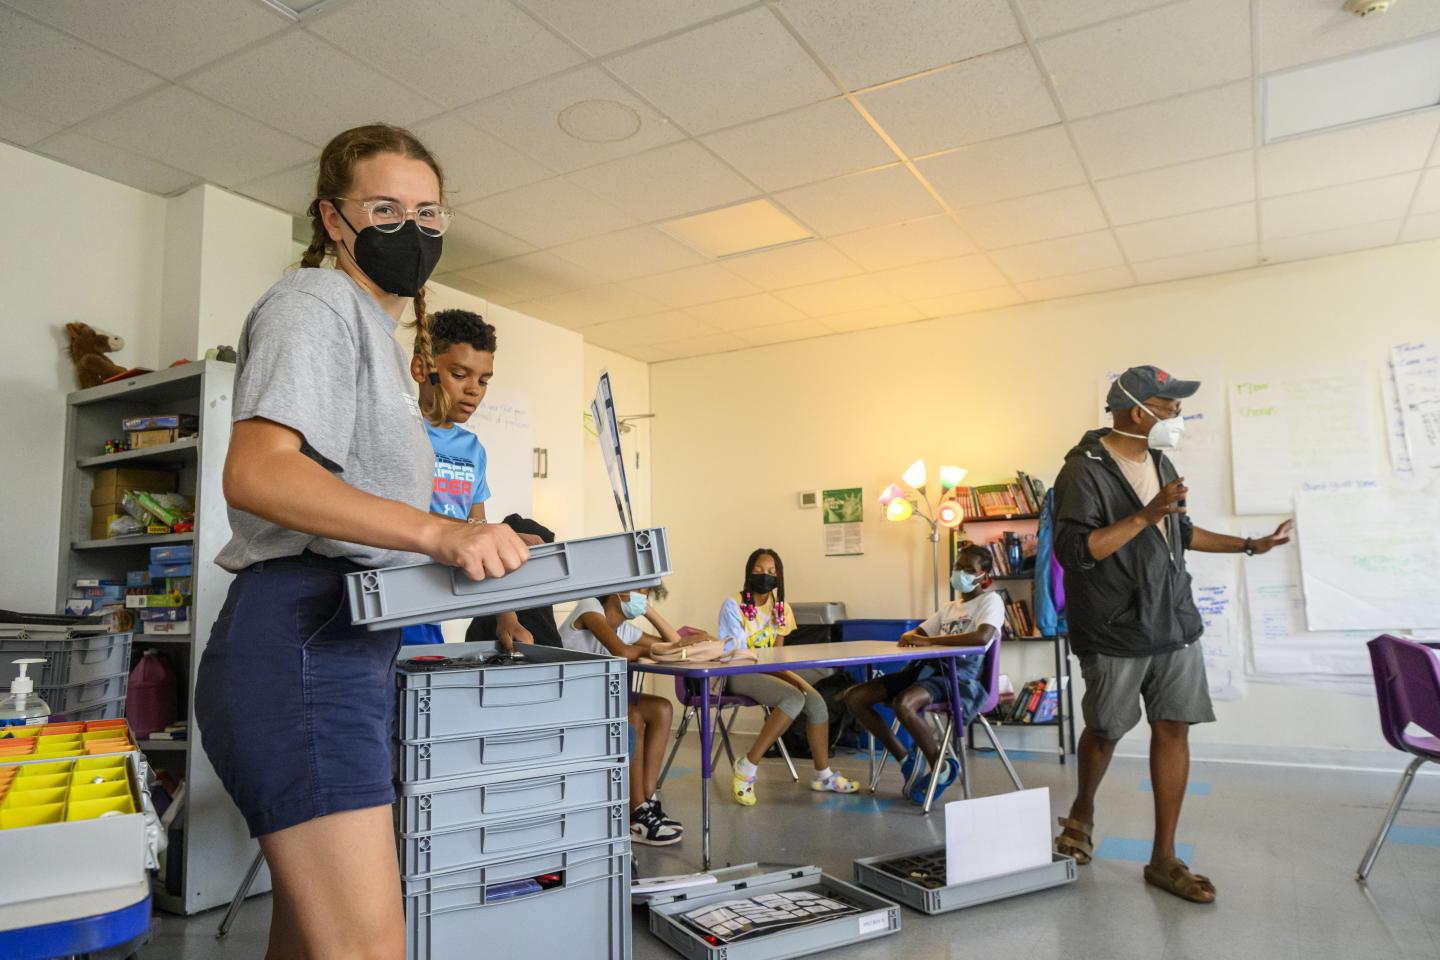 In a mask, Johns Hopkins student Helene Girard hands out supplies at Village Learning Place